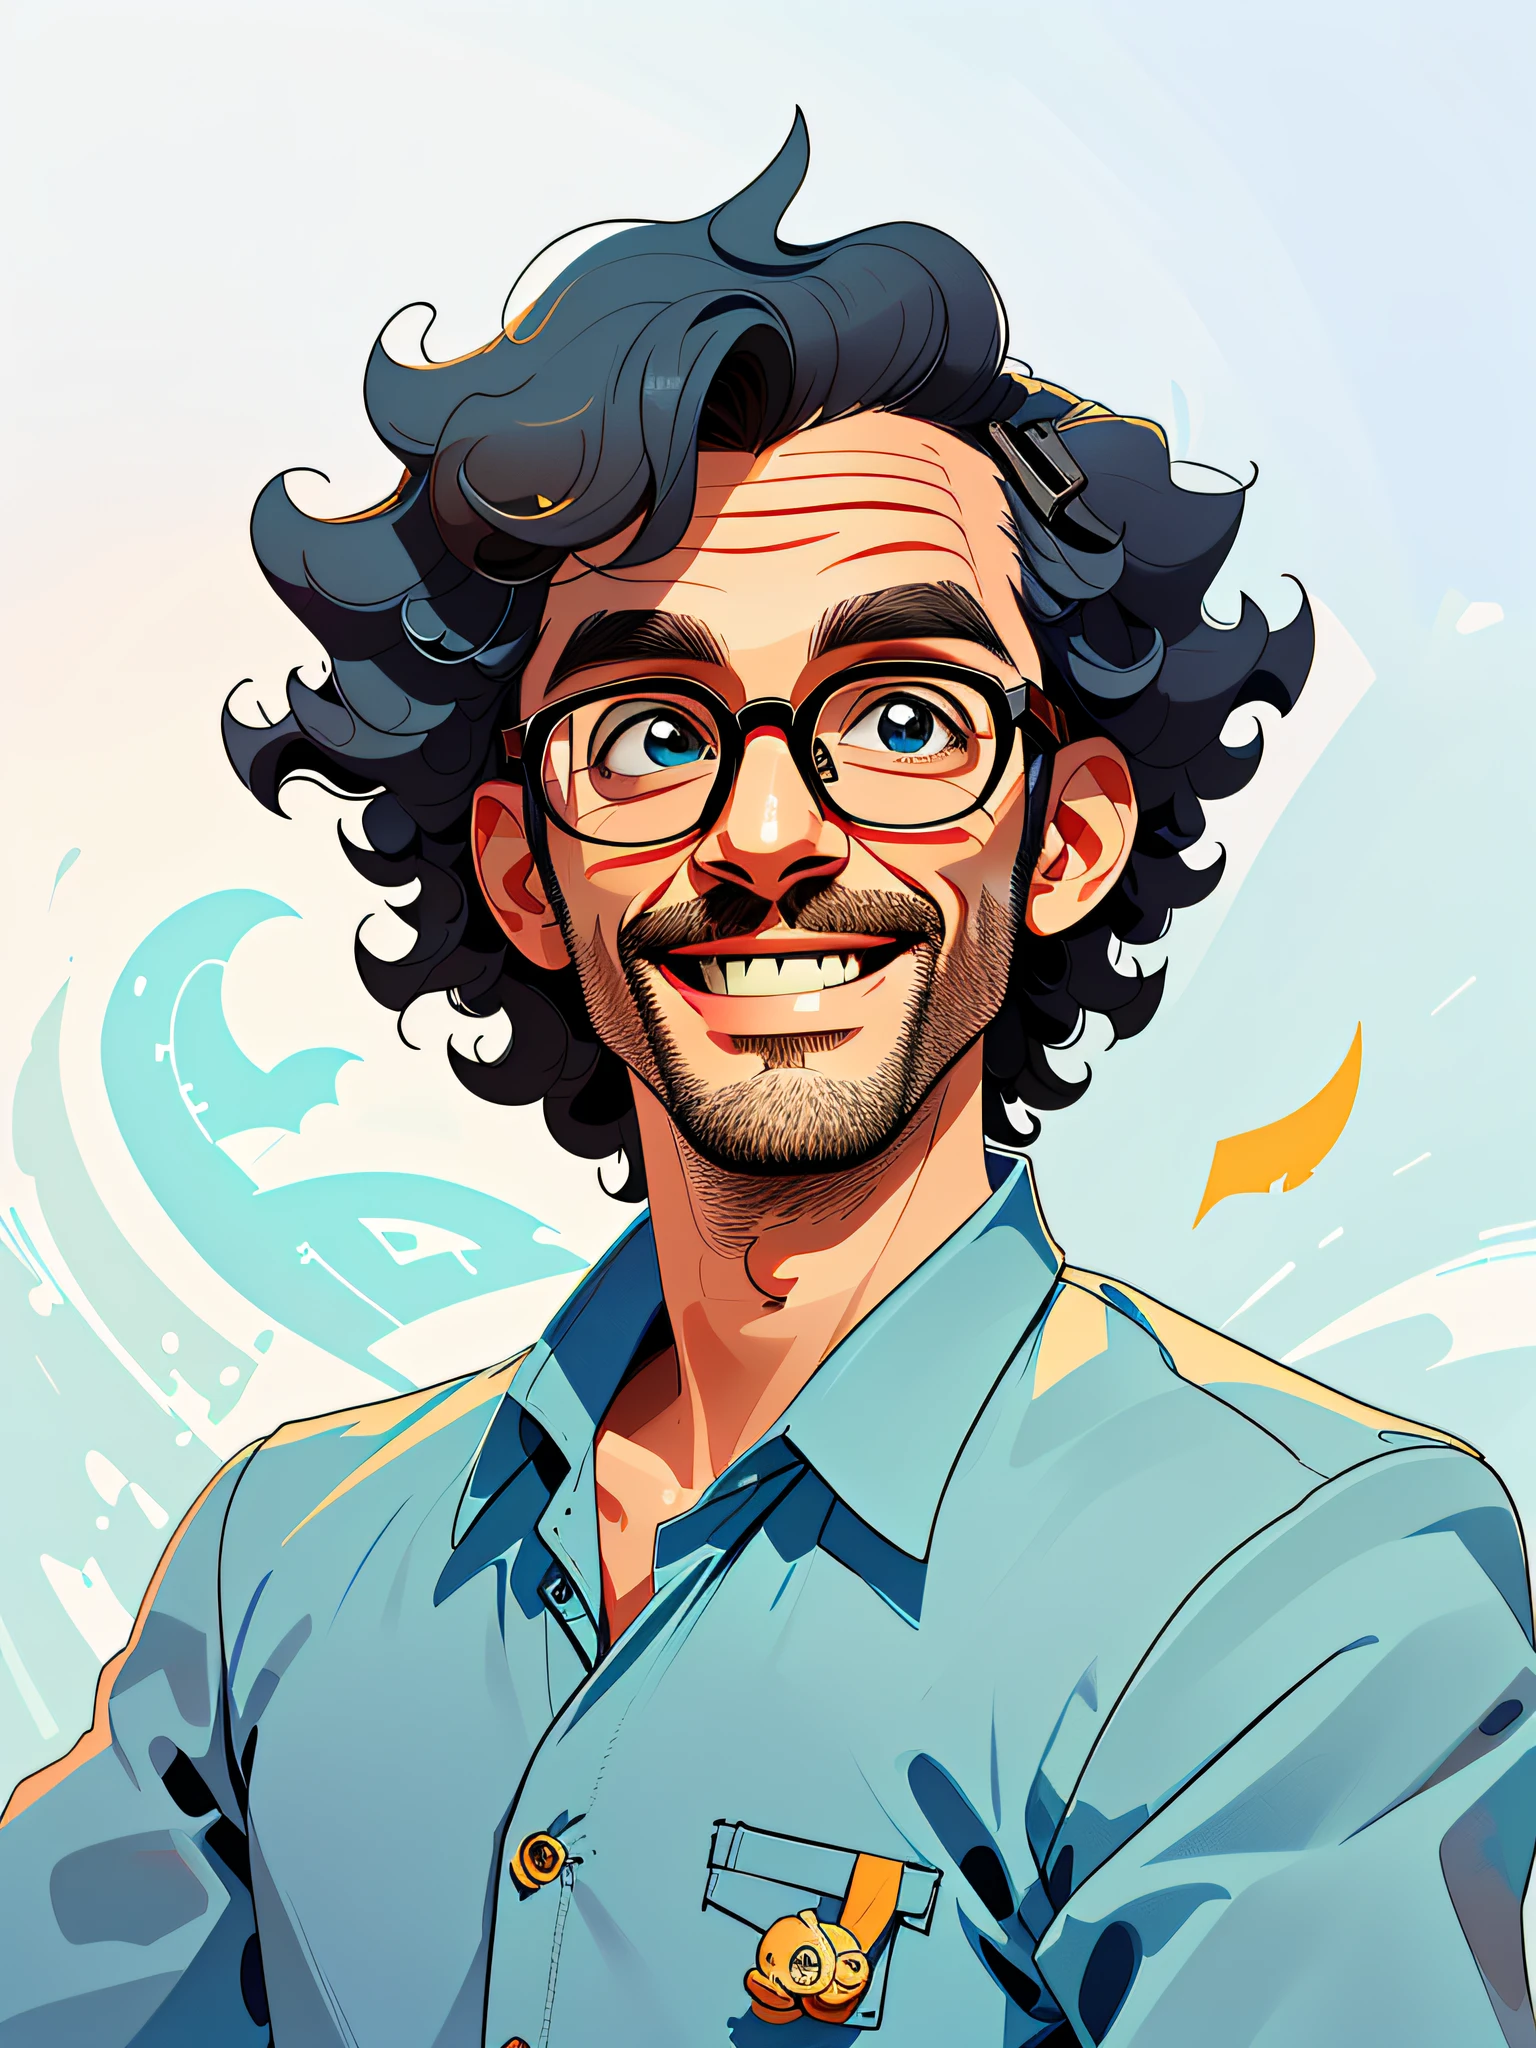 HD, (Best Detail), (Best Quality), Meticulous Facial Features, Smiling Man with Curly Hair in Blue Shirt and Glasses, Two-dimensional, Cartoon